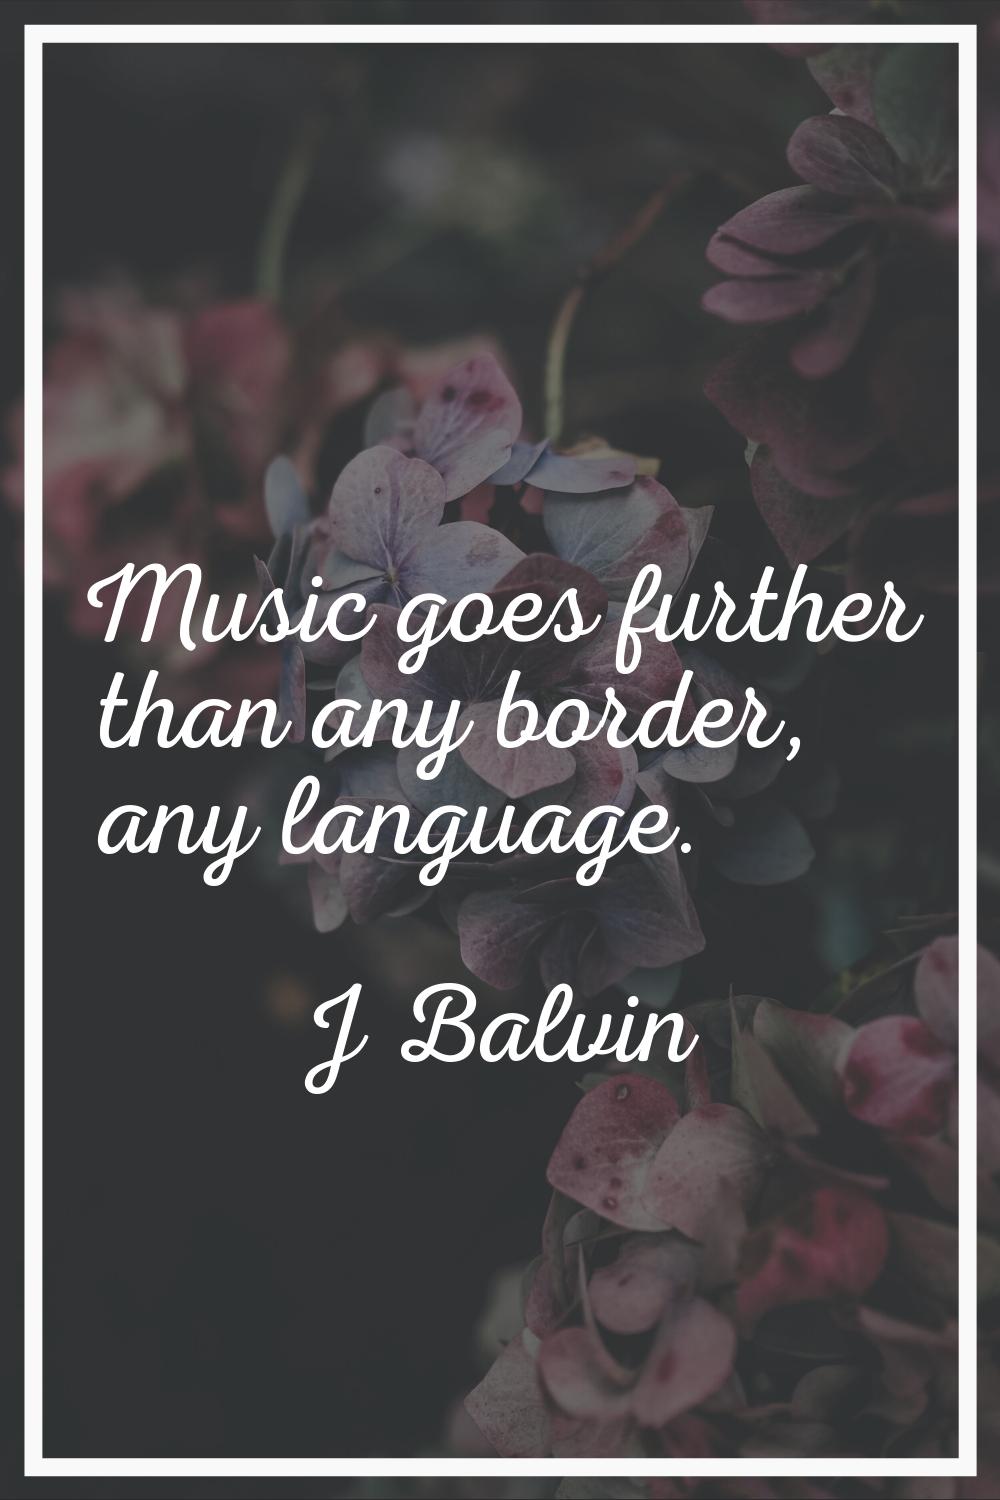 Music goes further than any border, any language.